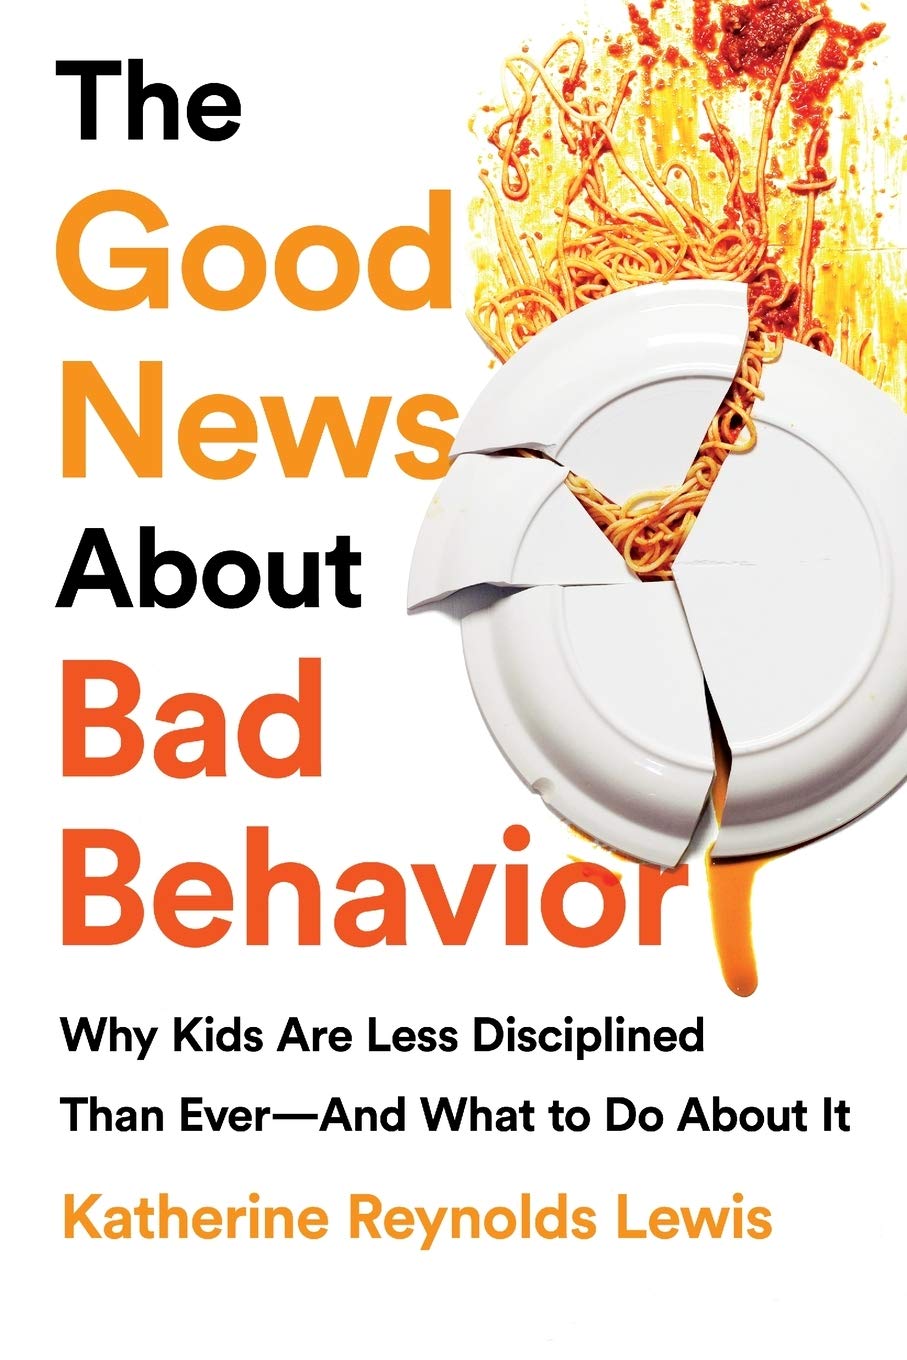 The Good News About Bad Behavior: Why Kids Are Less Disciplined Than Ever - And What to Do About It